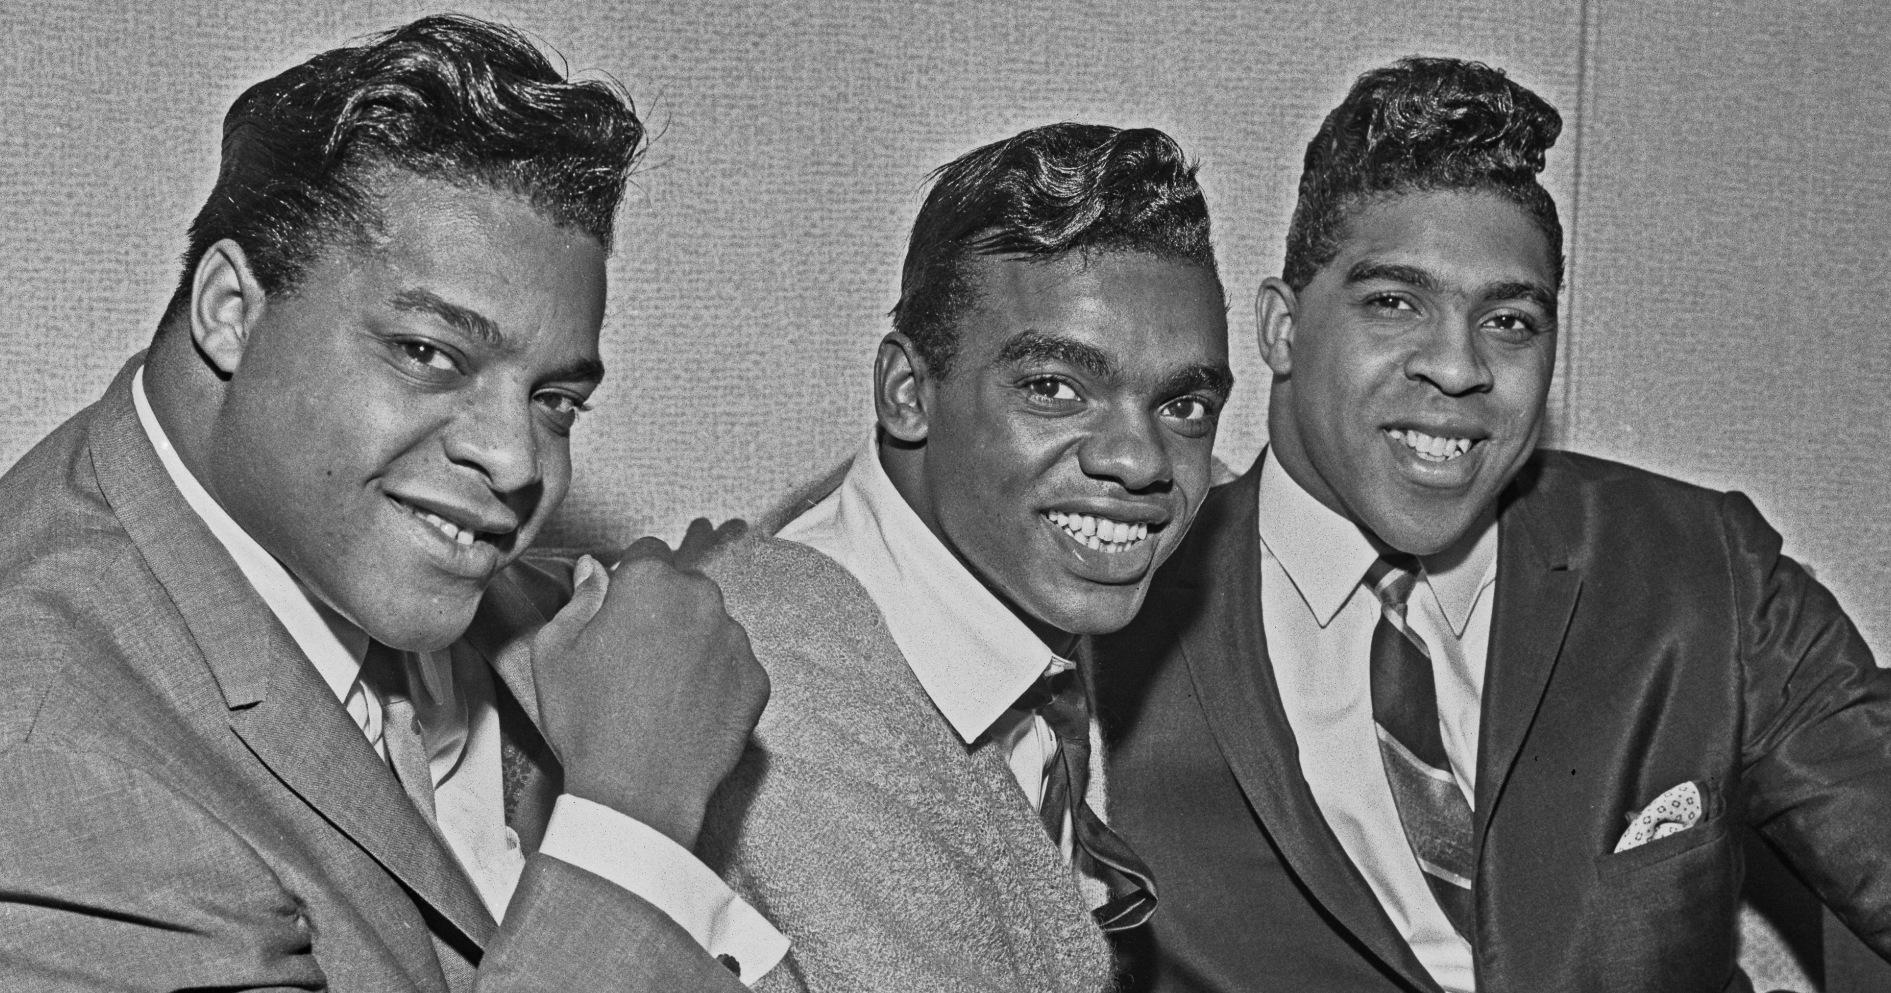 American vocal trio the Isley Brothers, UK, 24th October 1964. From left to right, they are brothers O'Kelly Isley Jr., Ronald Isley and Rudolph Isley. 